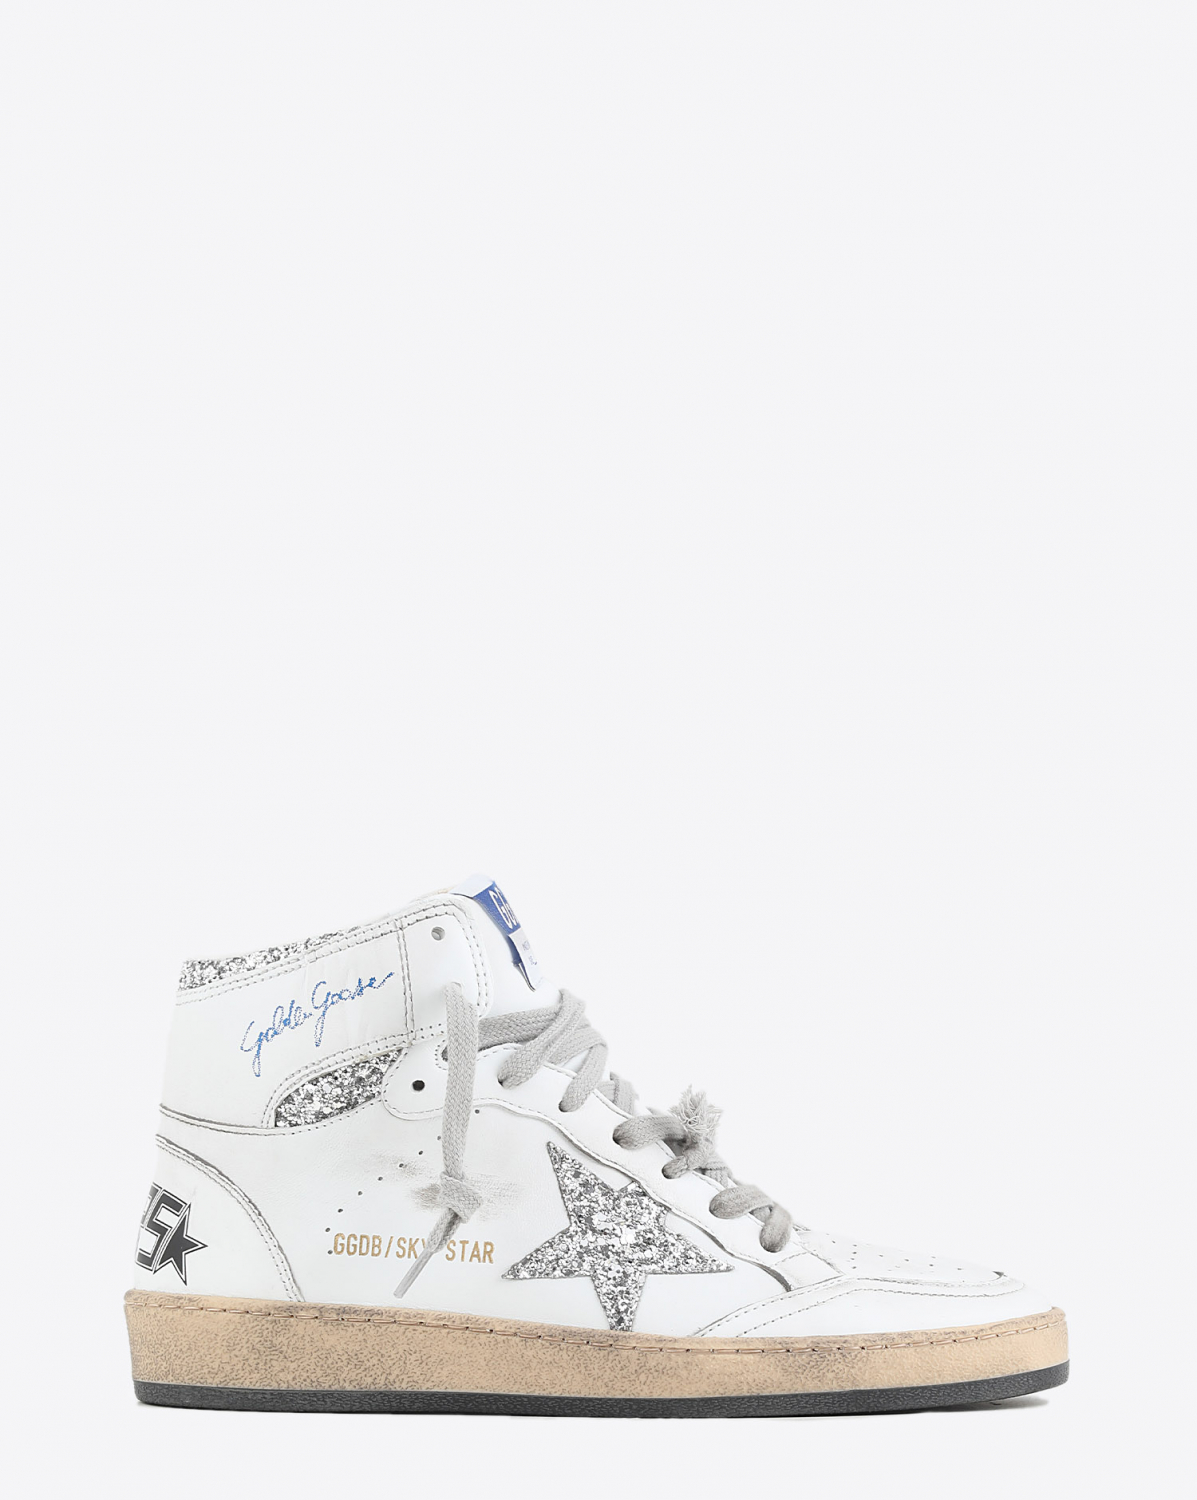 Sneakers Golden Goose Woman Permanent Sky Star - White Silver 80185